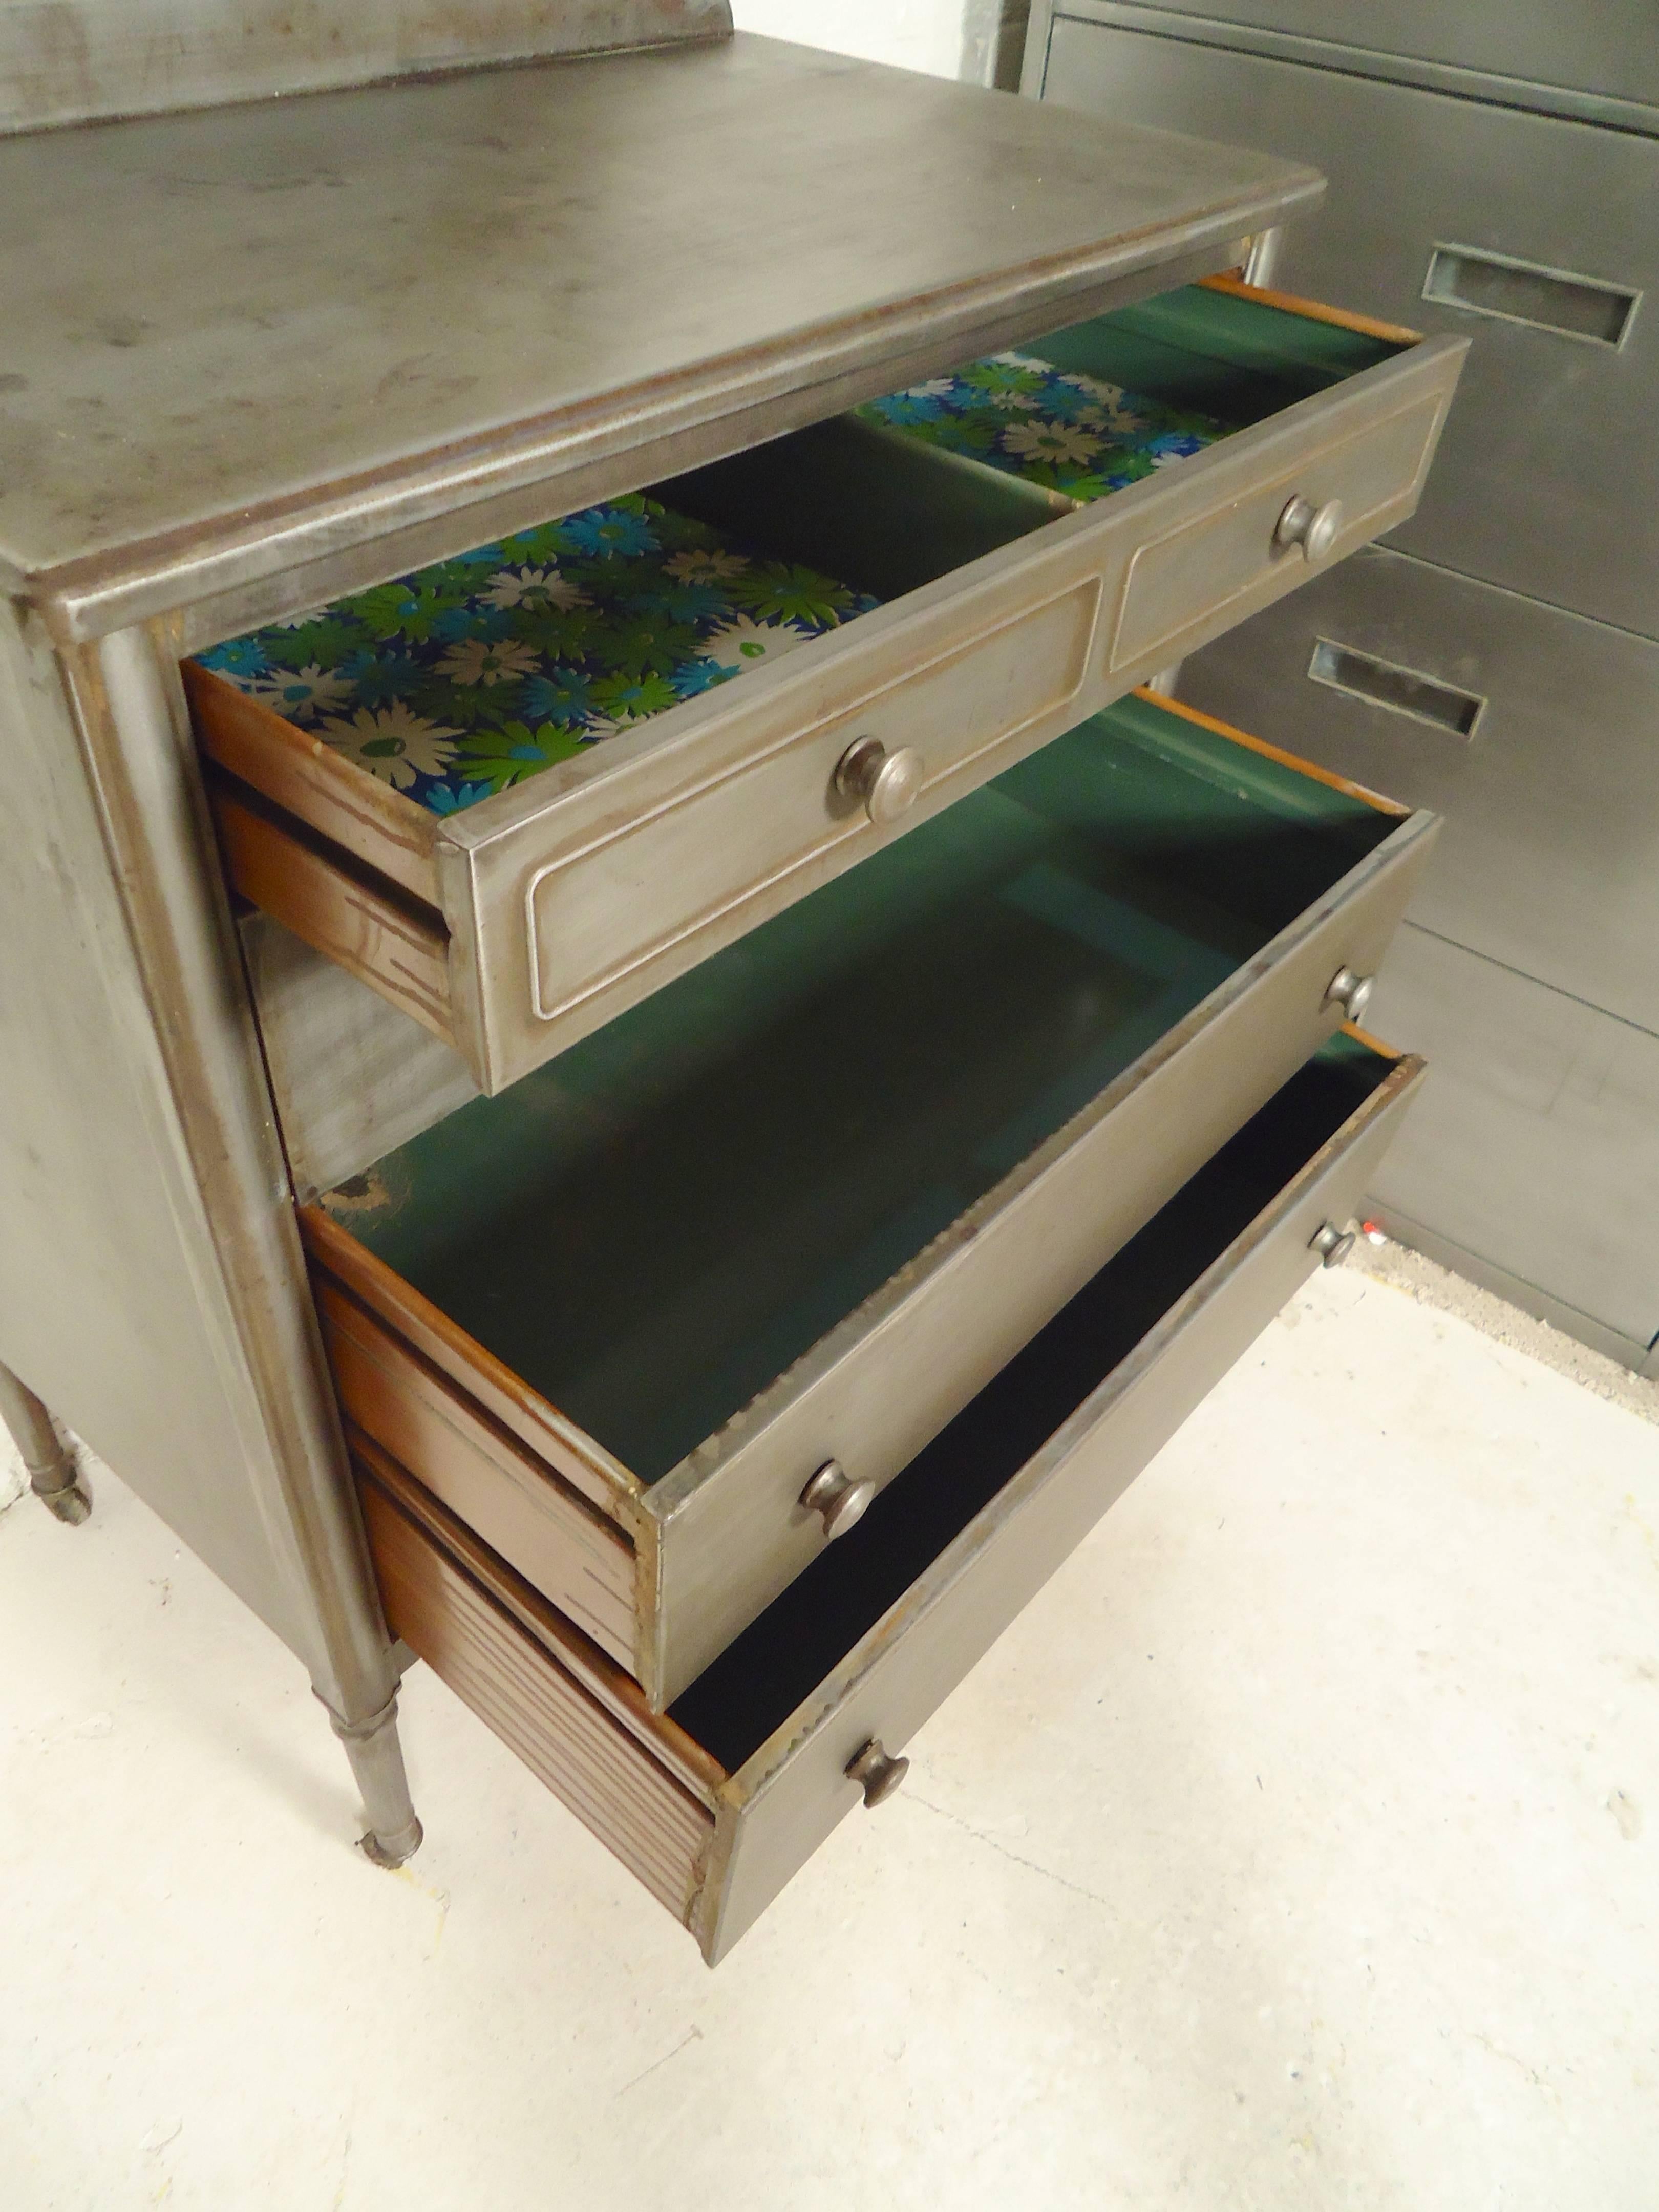 Unique metal dresser with mirror and pull-out table. Three wide dresser drawers, tilting mirror and small caster wheels. This dresser has been restored in a bare metal style finish, giving a distinct Industrial look.

Table height is 26